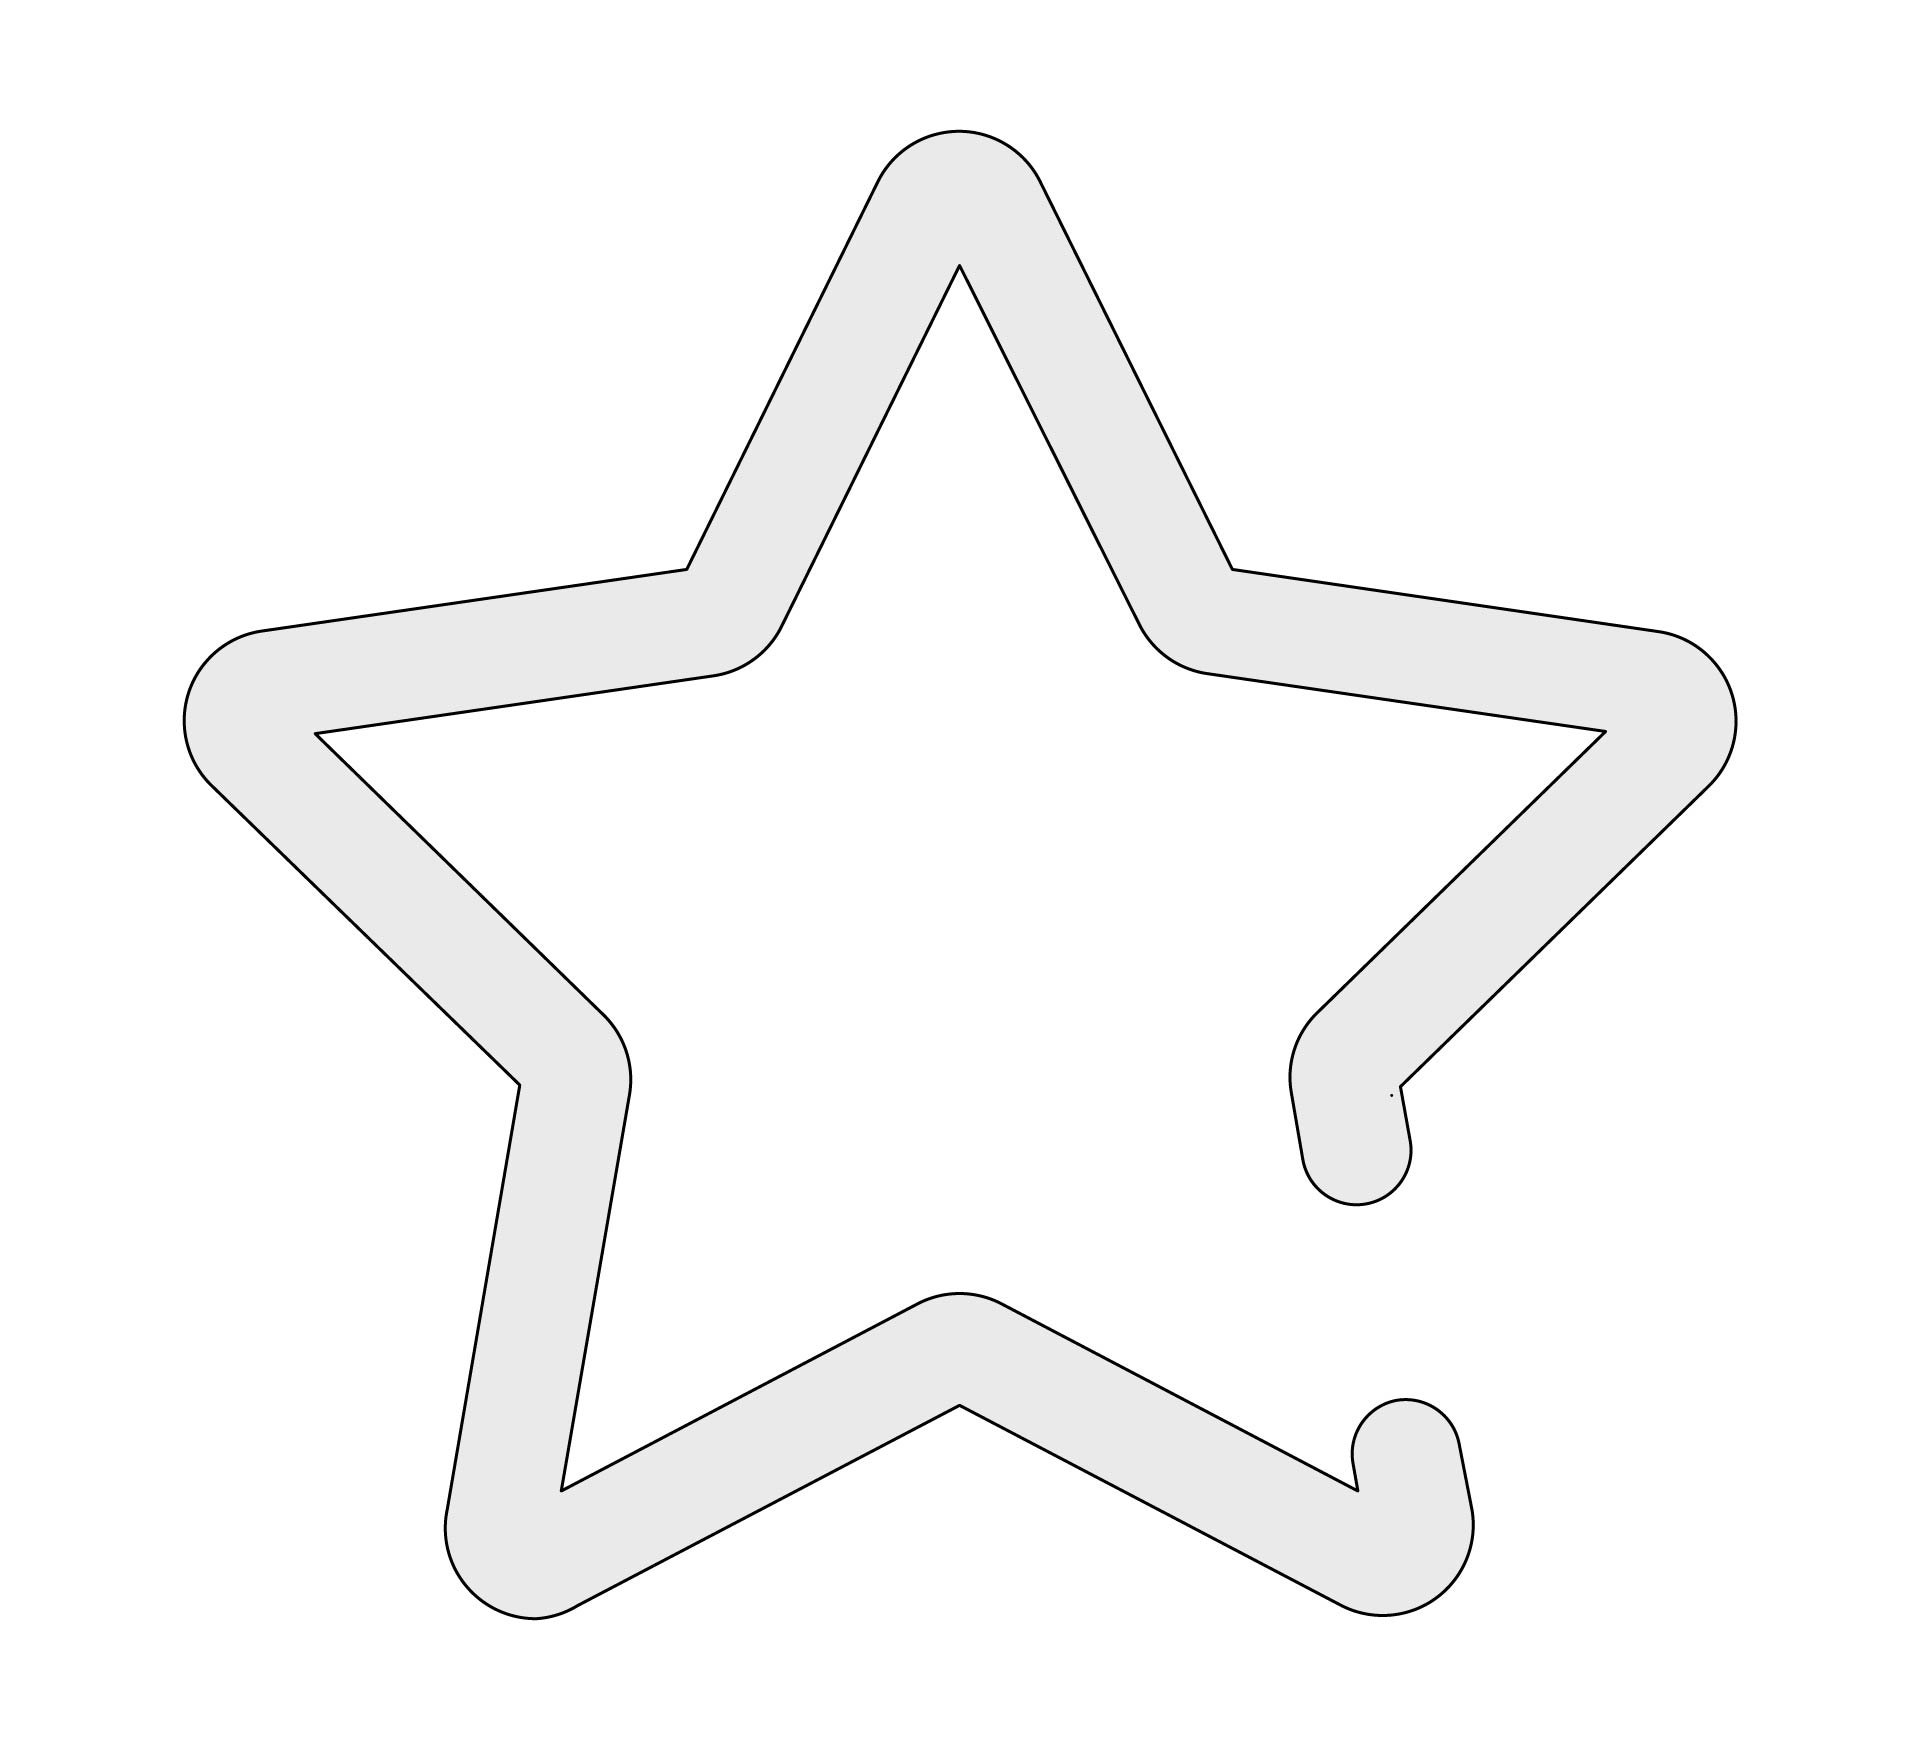 5 Best Images of Large Star Stencil Printable Large Star Template, 5